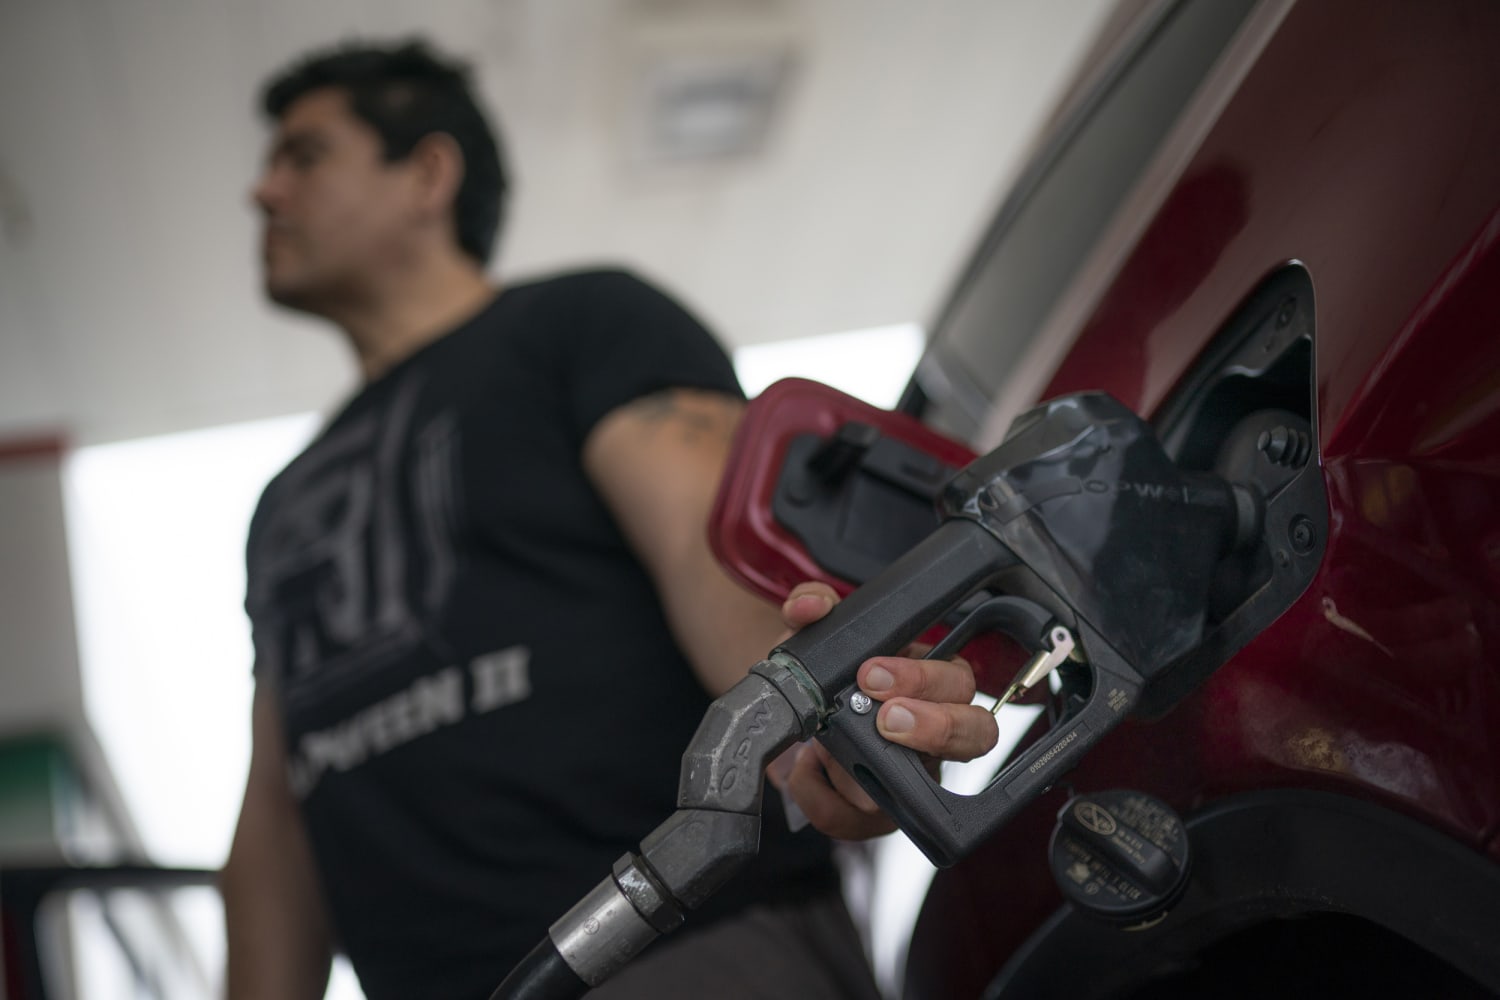 U.S. gas prices fall below $4 for the first time in months